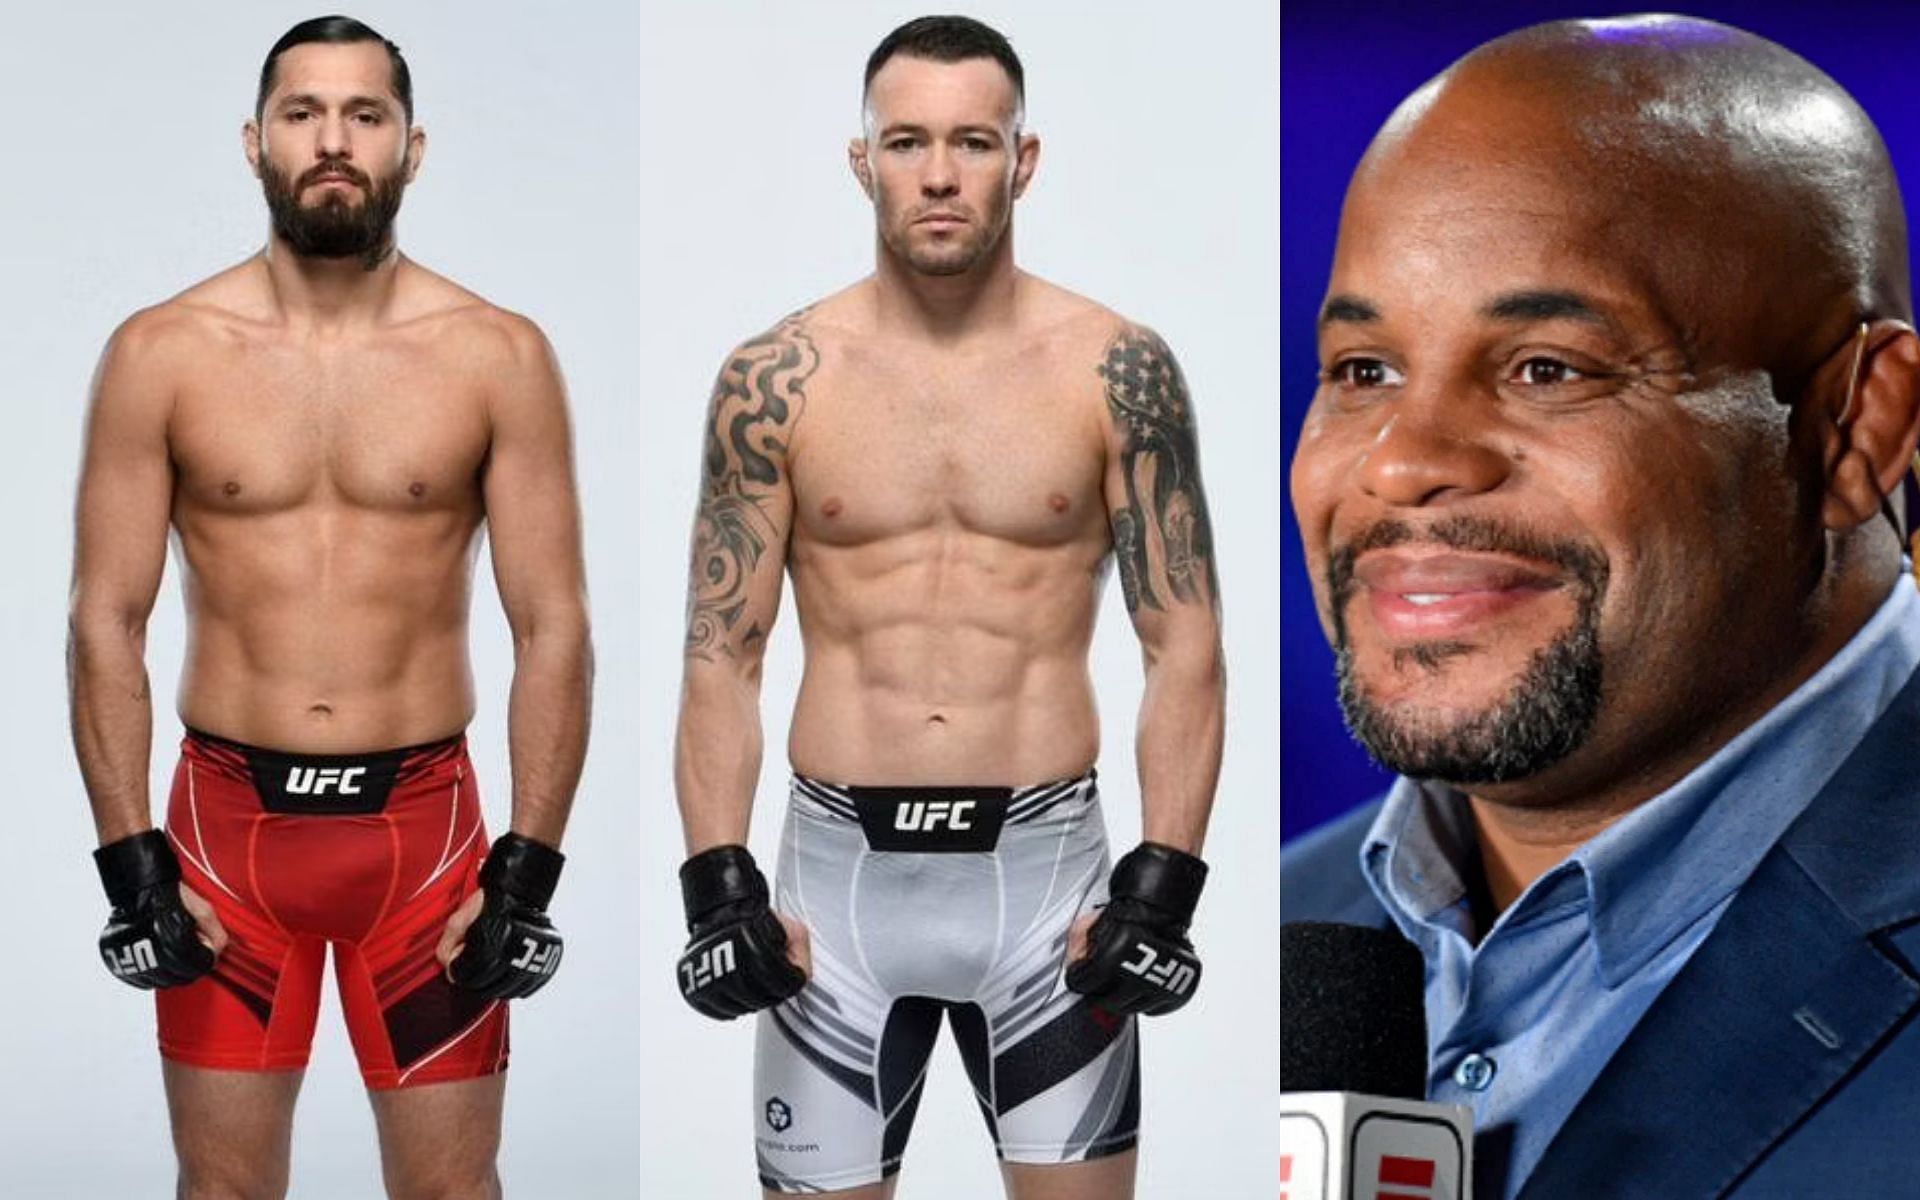 Jorge Masvidal, Colby Covington, and Daniel Cormier (left to right) [Masvidal and Covington images Courtesy: @colbycovmma and @gamebredfighter on Instagram]